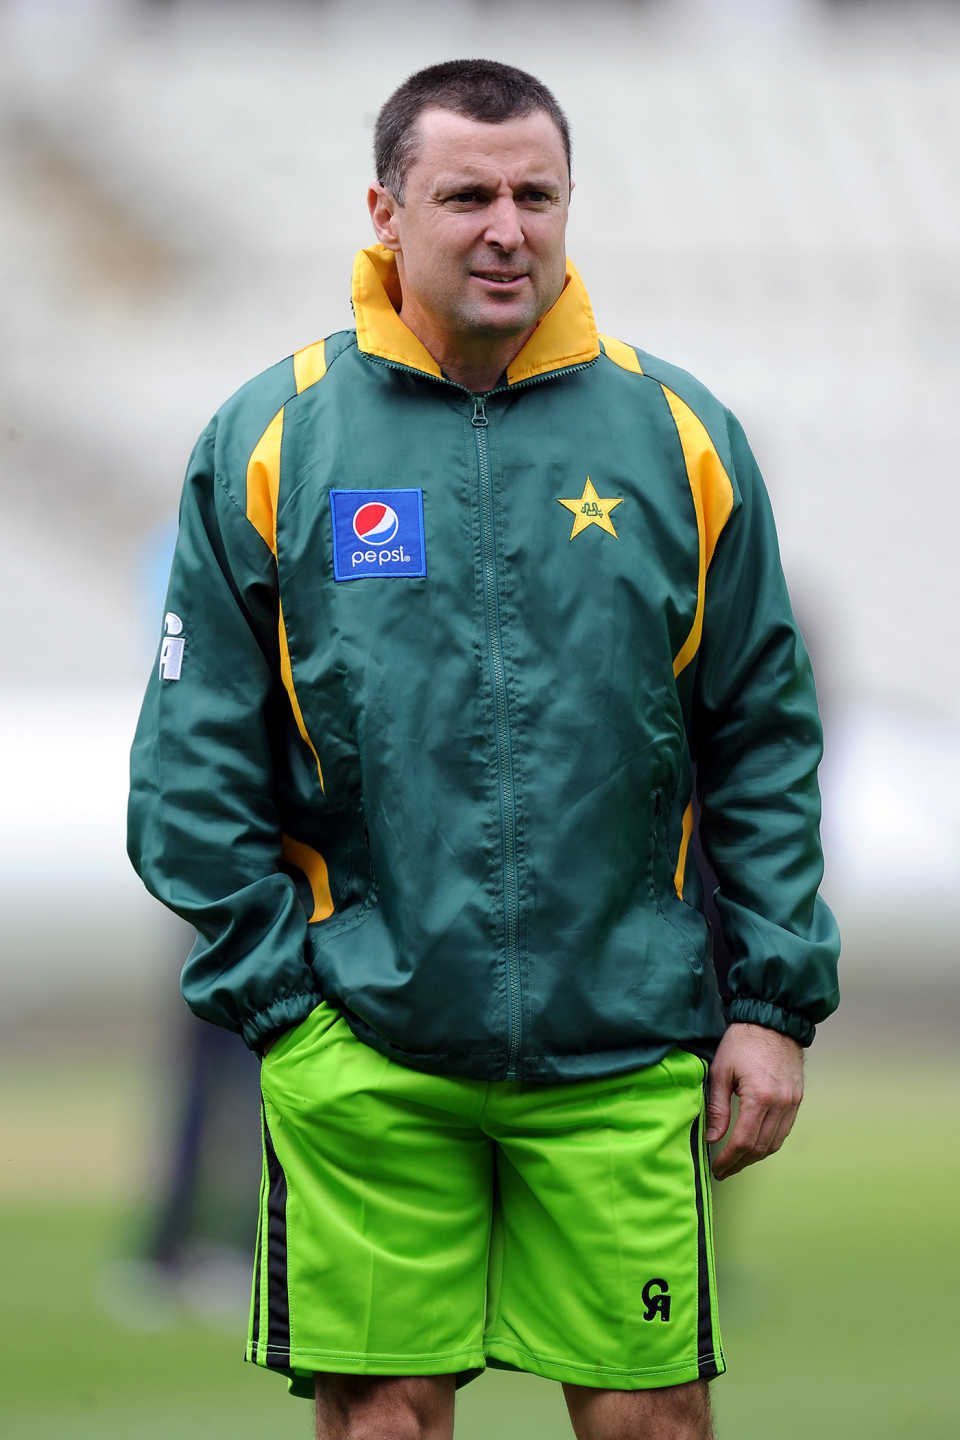 Trent Woodhill (seen here in his time with Pakistan) will continue his work as head coach of the Melbourne Stars' WBBL team